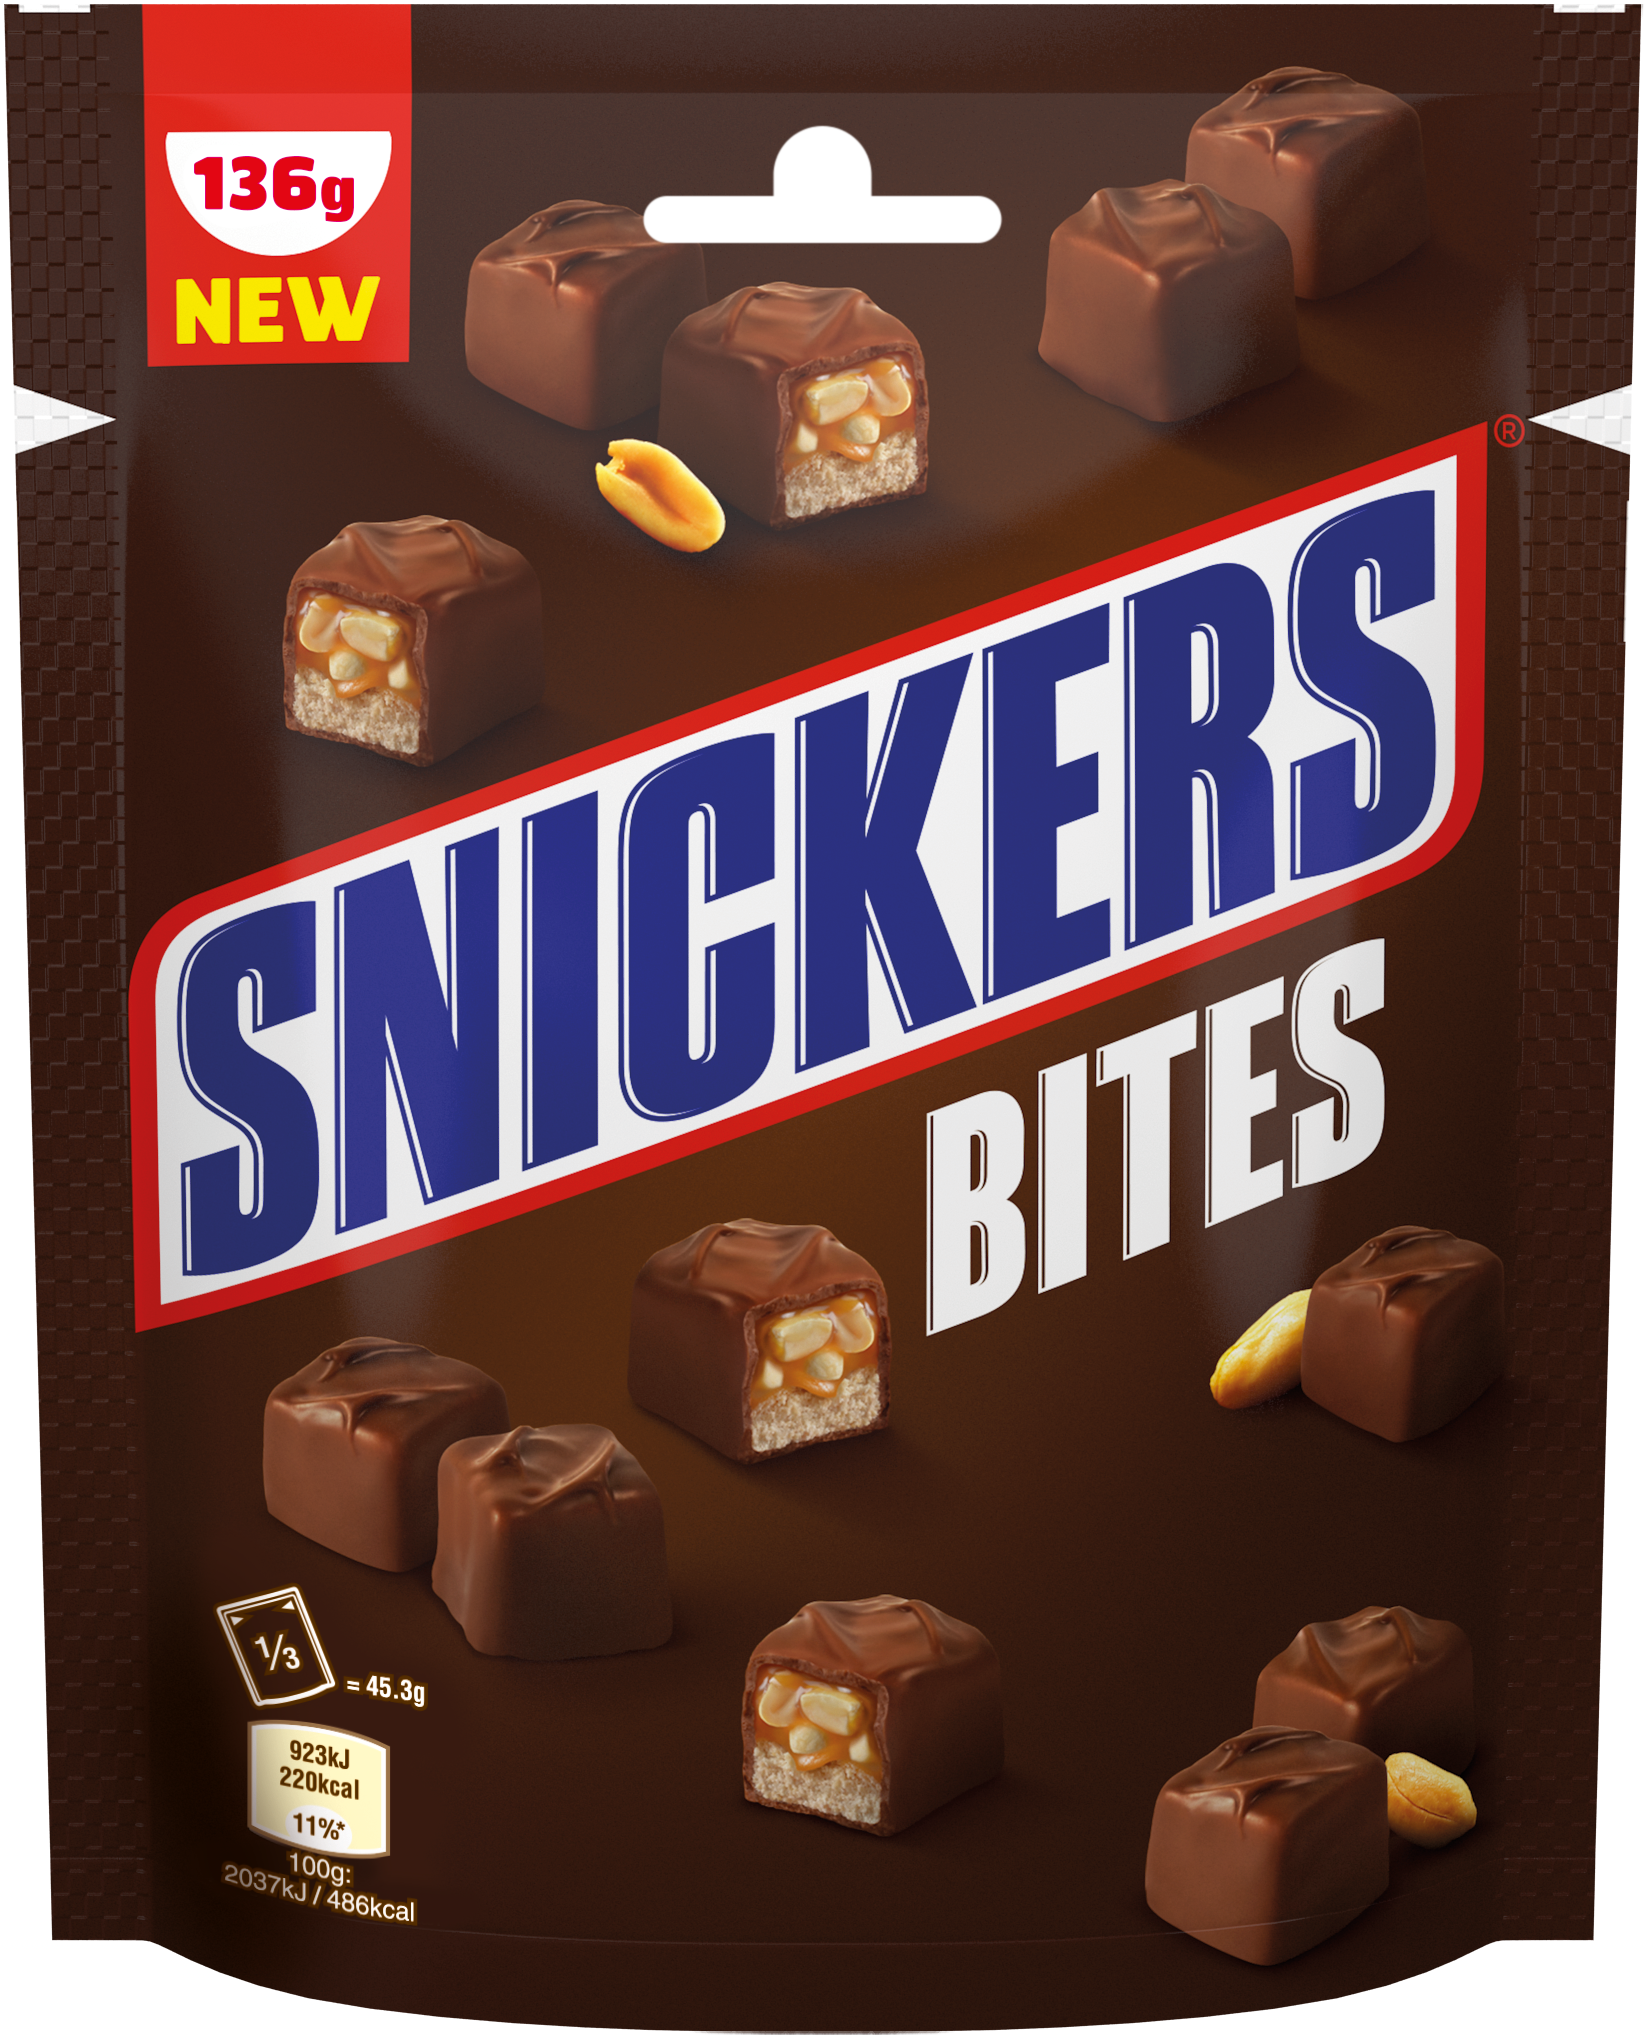 Bites_snickers_136g_3D